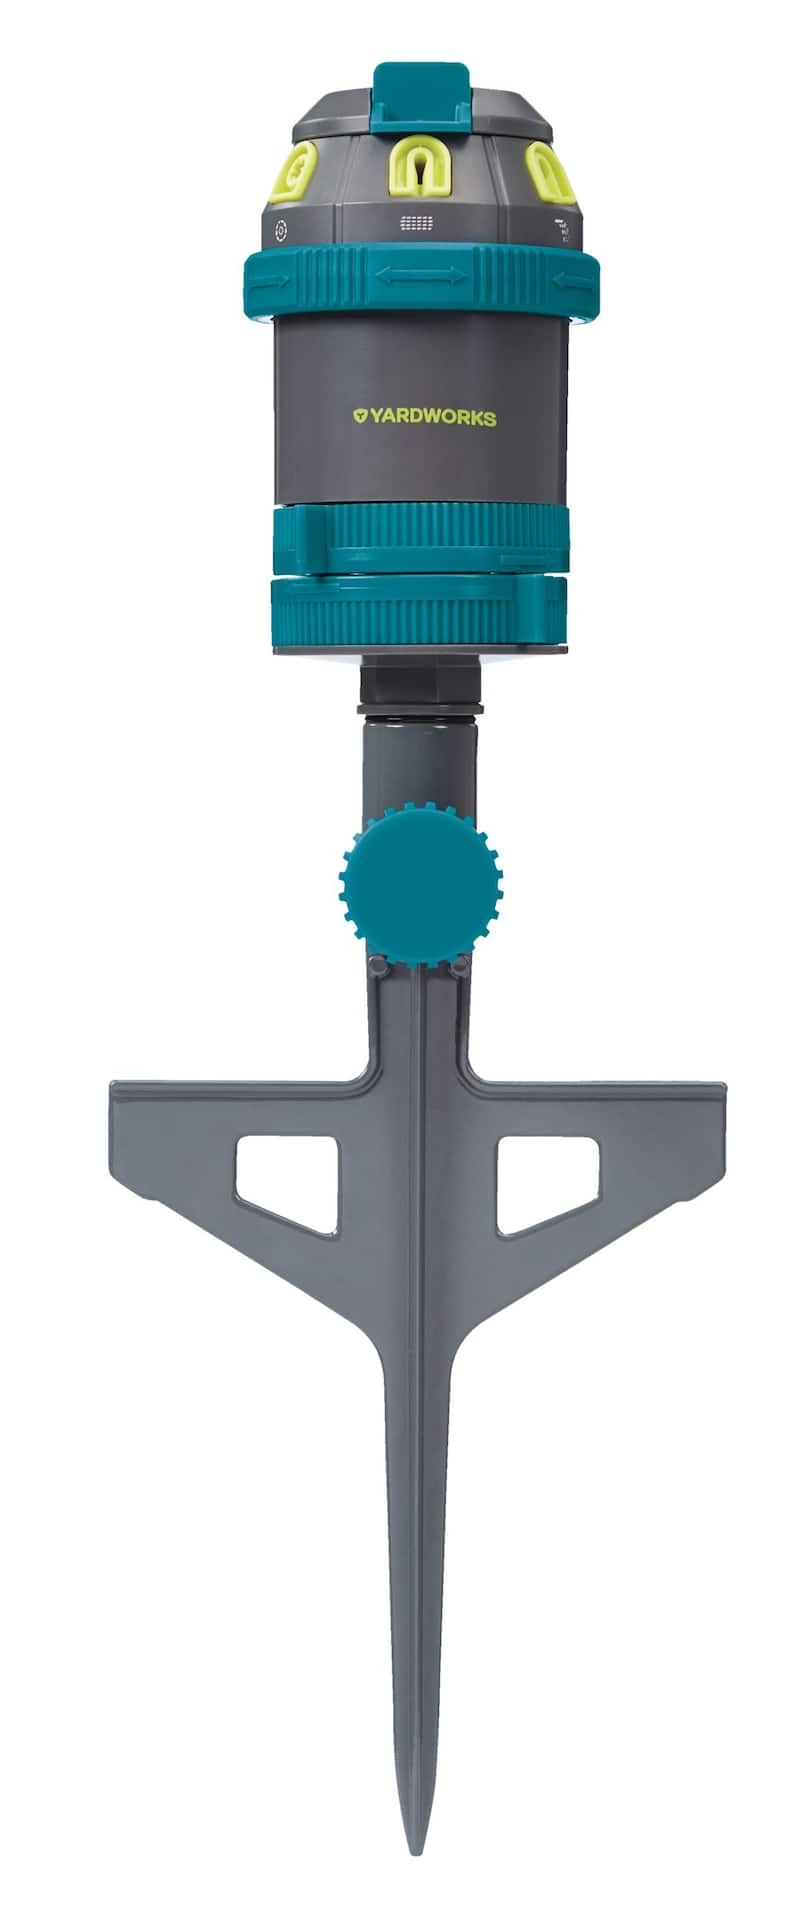 Gardena Deluxe Impulse Sprinkler with a Weighted Base, 5200 sq.ft